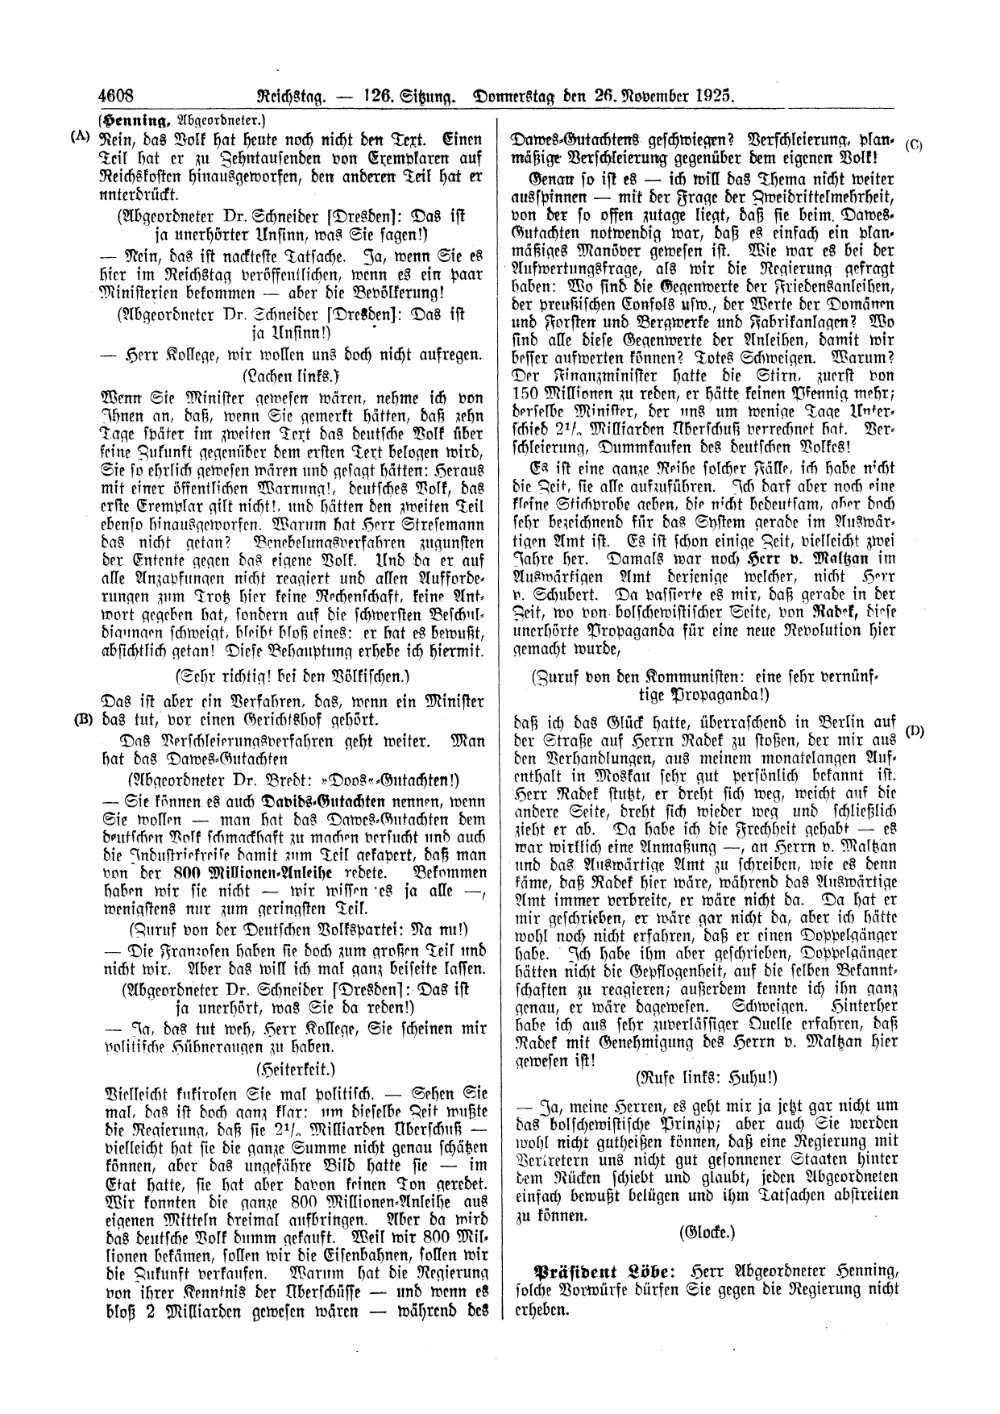 Scan of page 4608